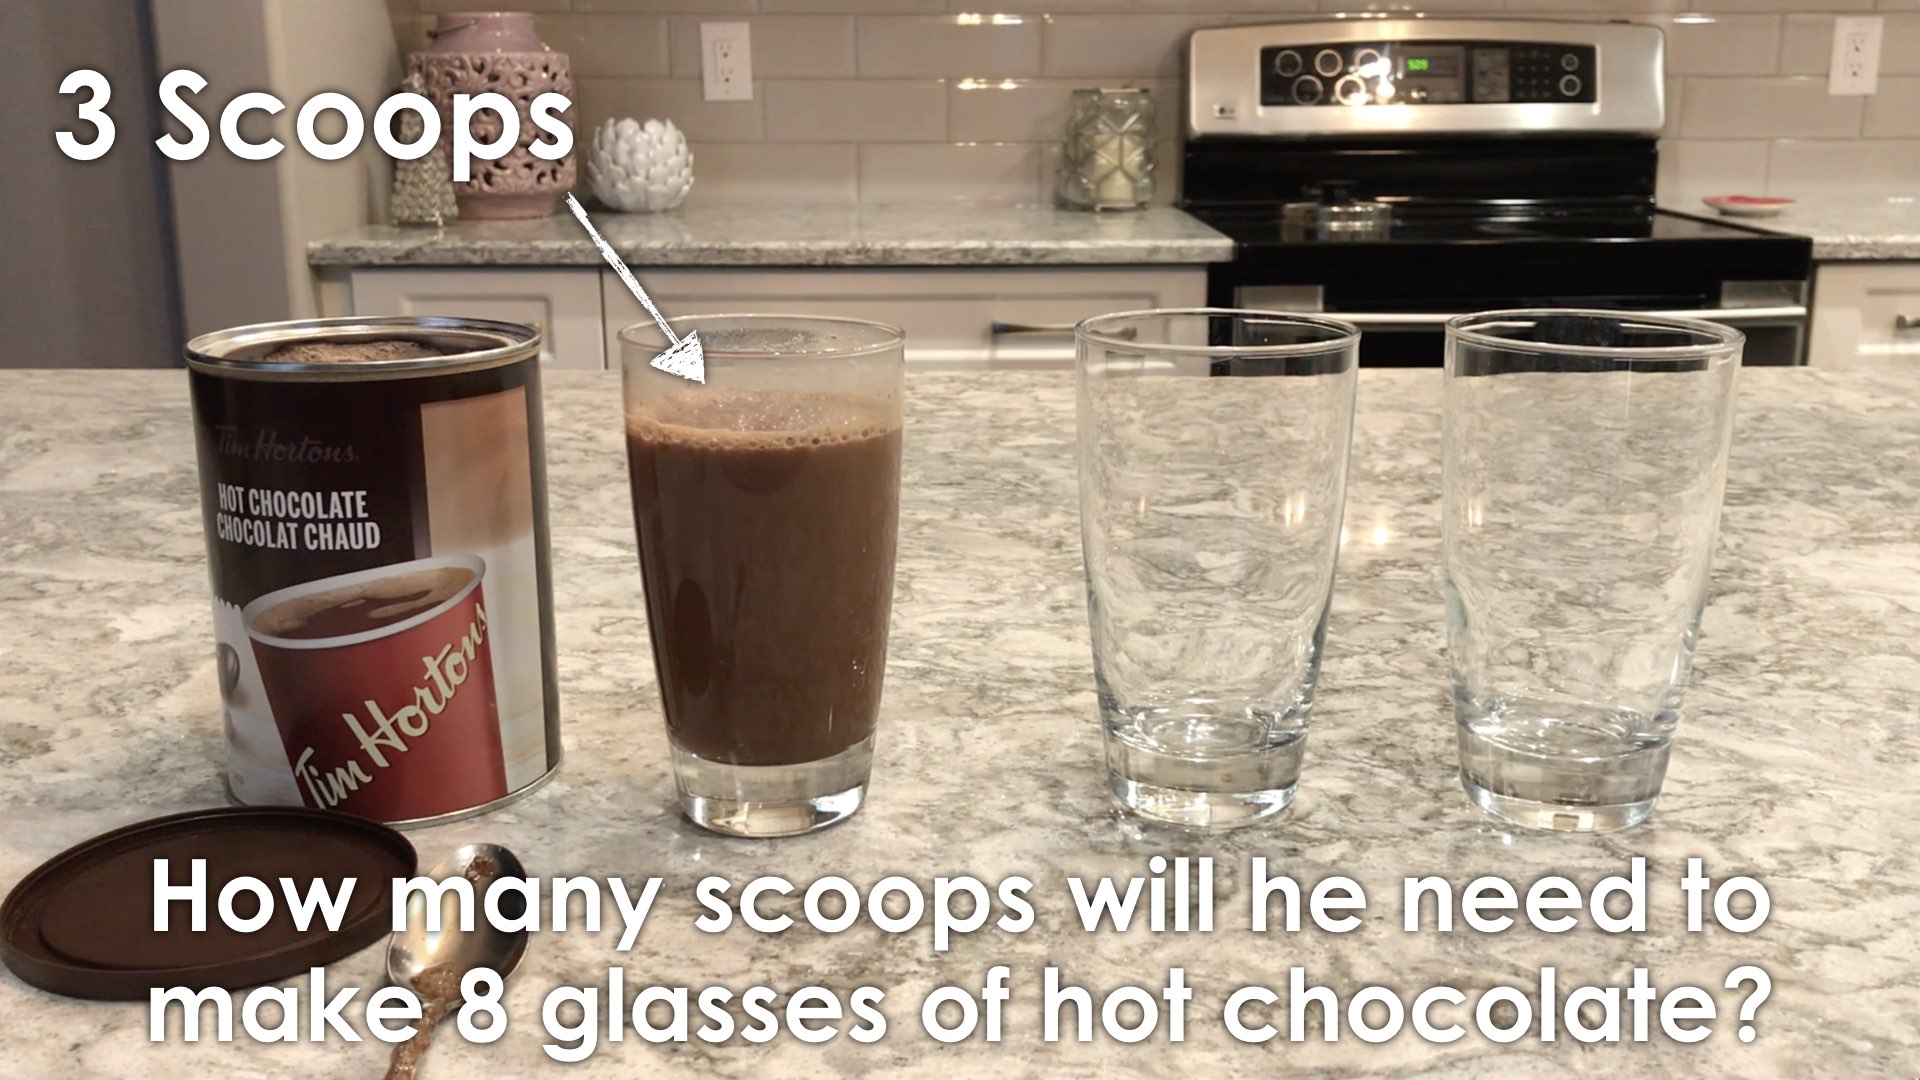 Hot Chocolate 2 - Sense Making.003 how many for 8 glasses